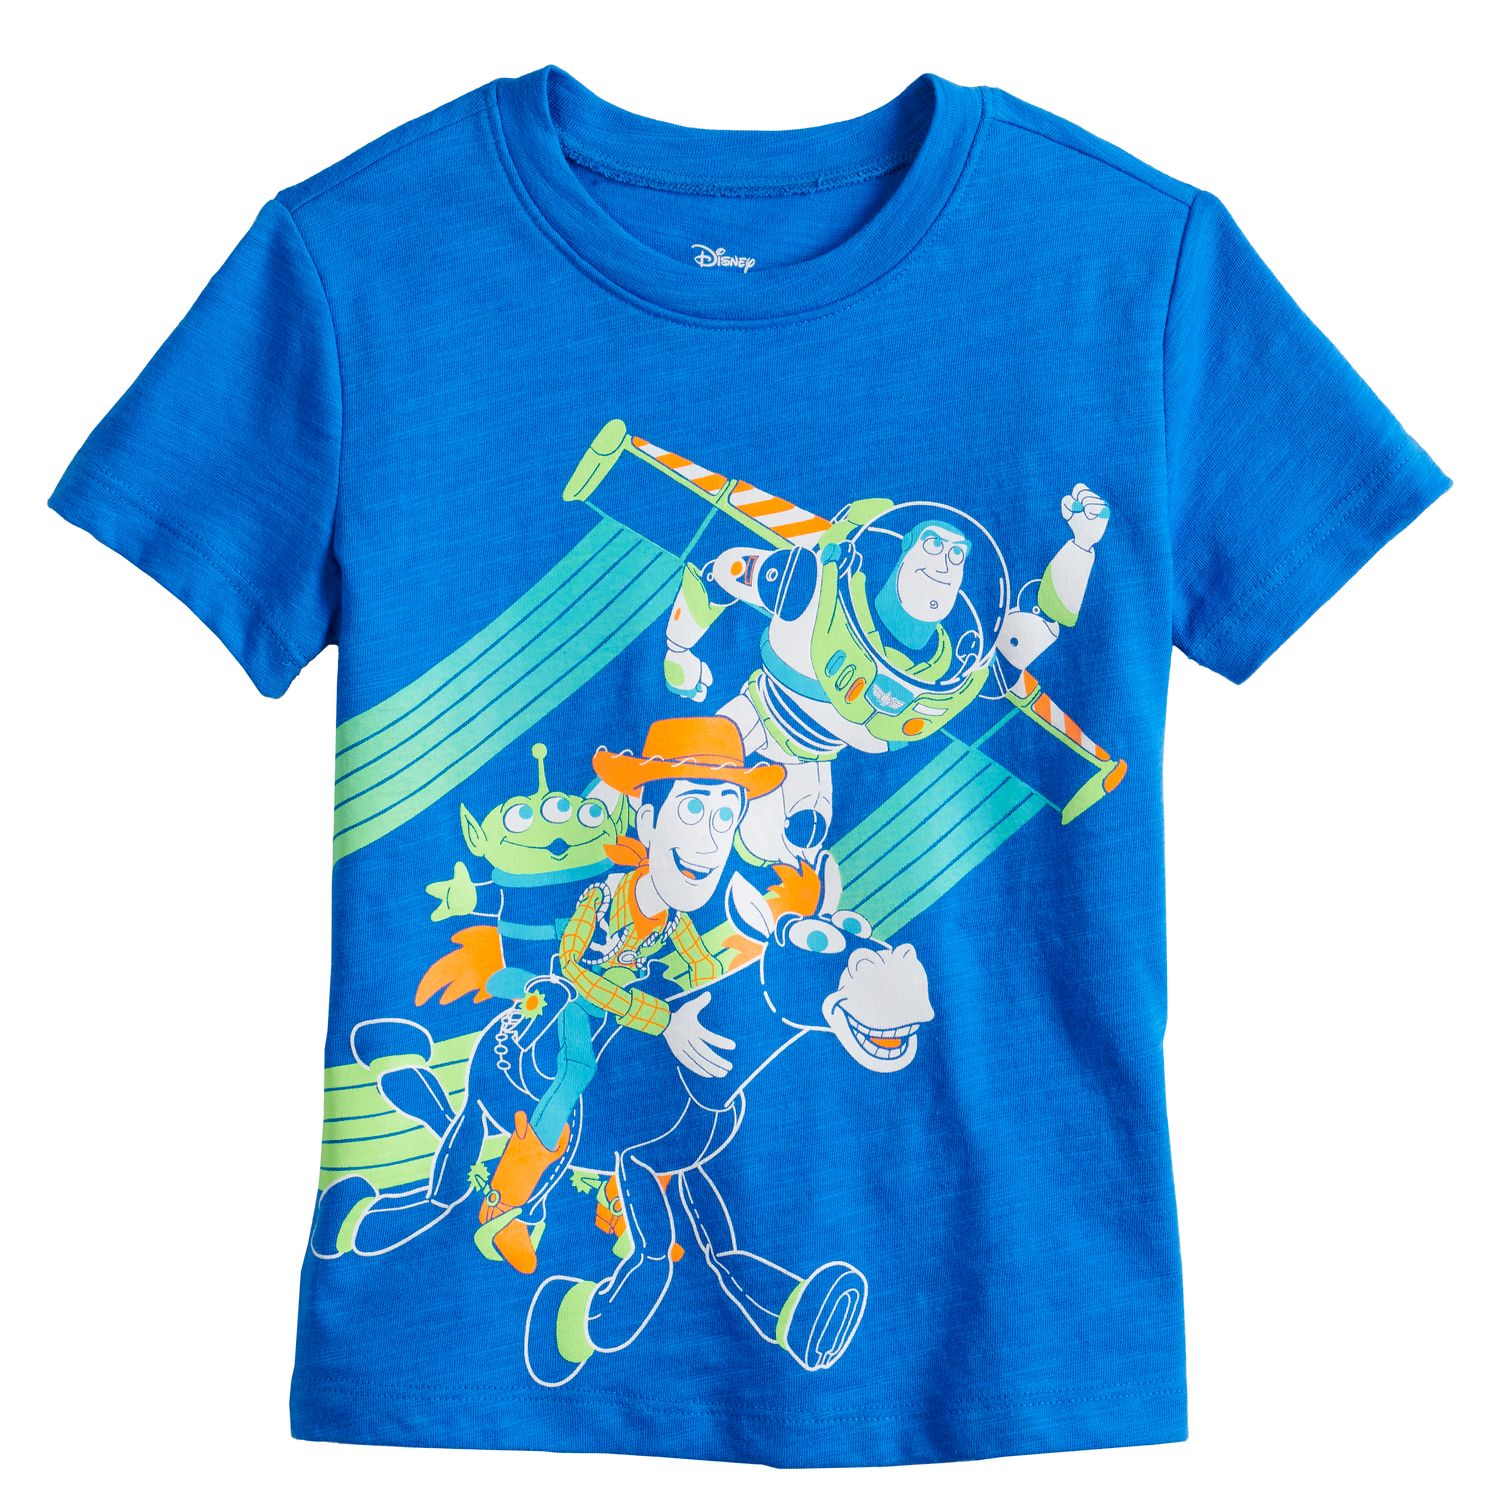 Image for Disney / Pixar Toy Story Toddler Boy / Boys 4-12 Adaptive Double Layer Tee by Jumping Beans® at Kohl's.